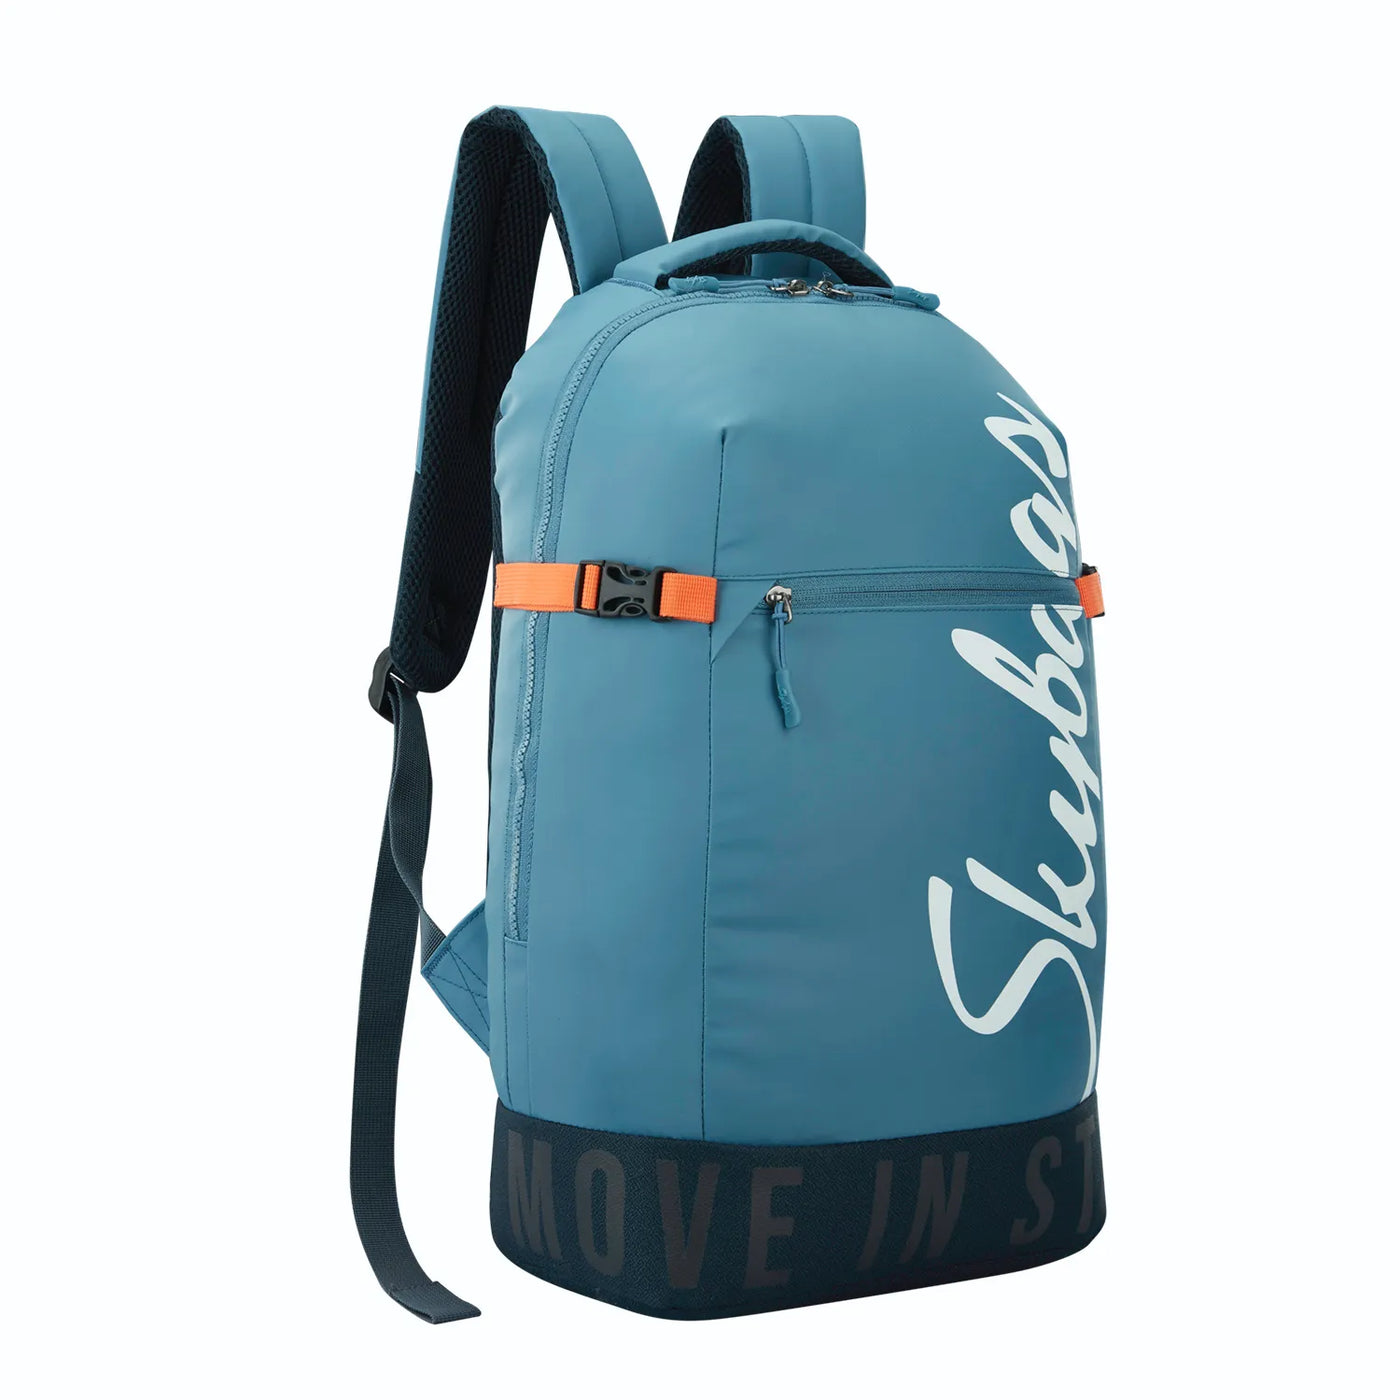 SKYBAGS Boho "01 Backpack With Rain Cover" Light Blue